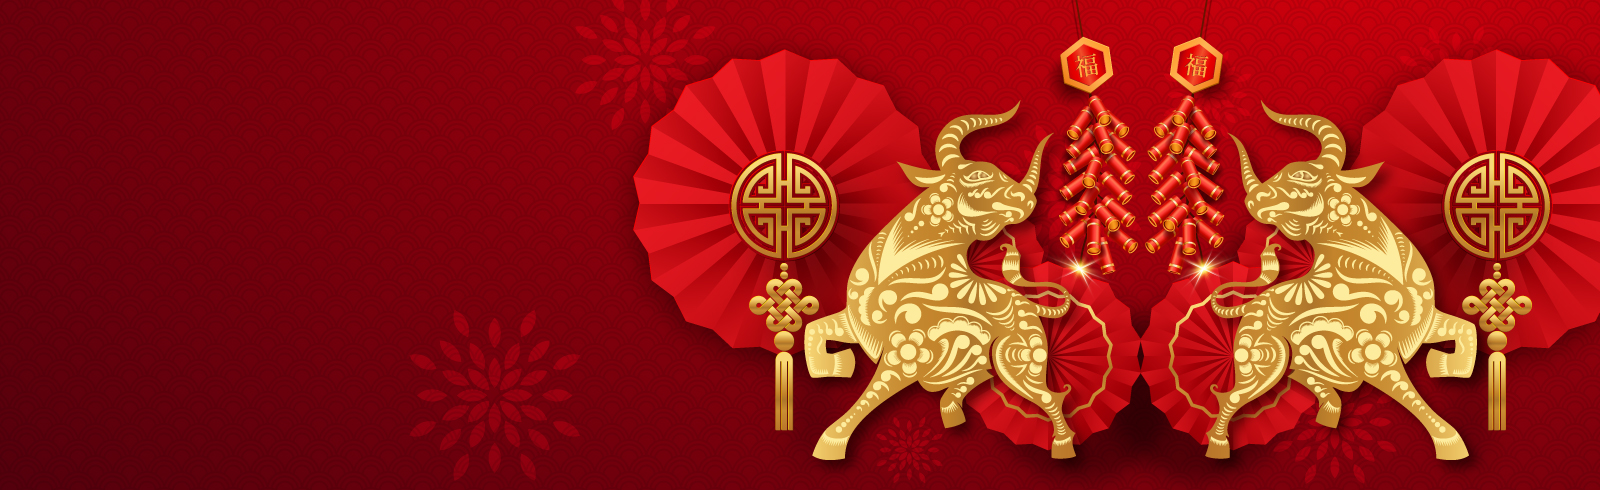 Usher in twice the prosperity in the year of the Ox with double duit